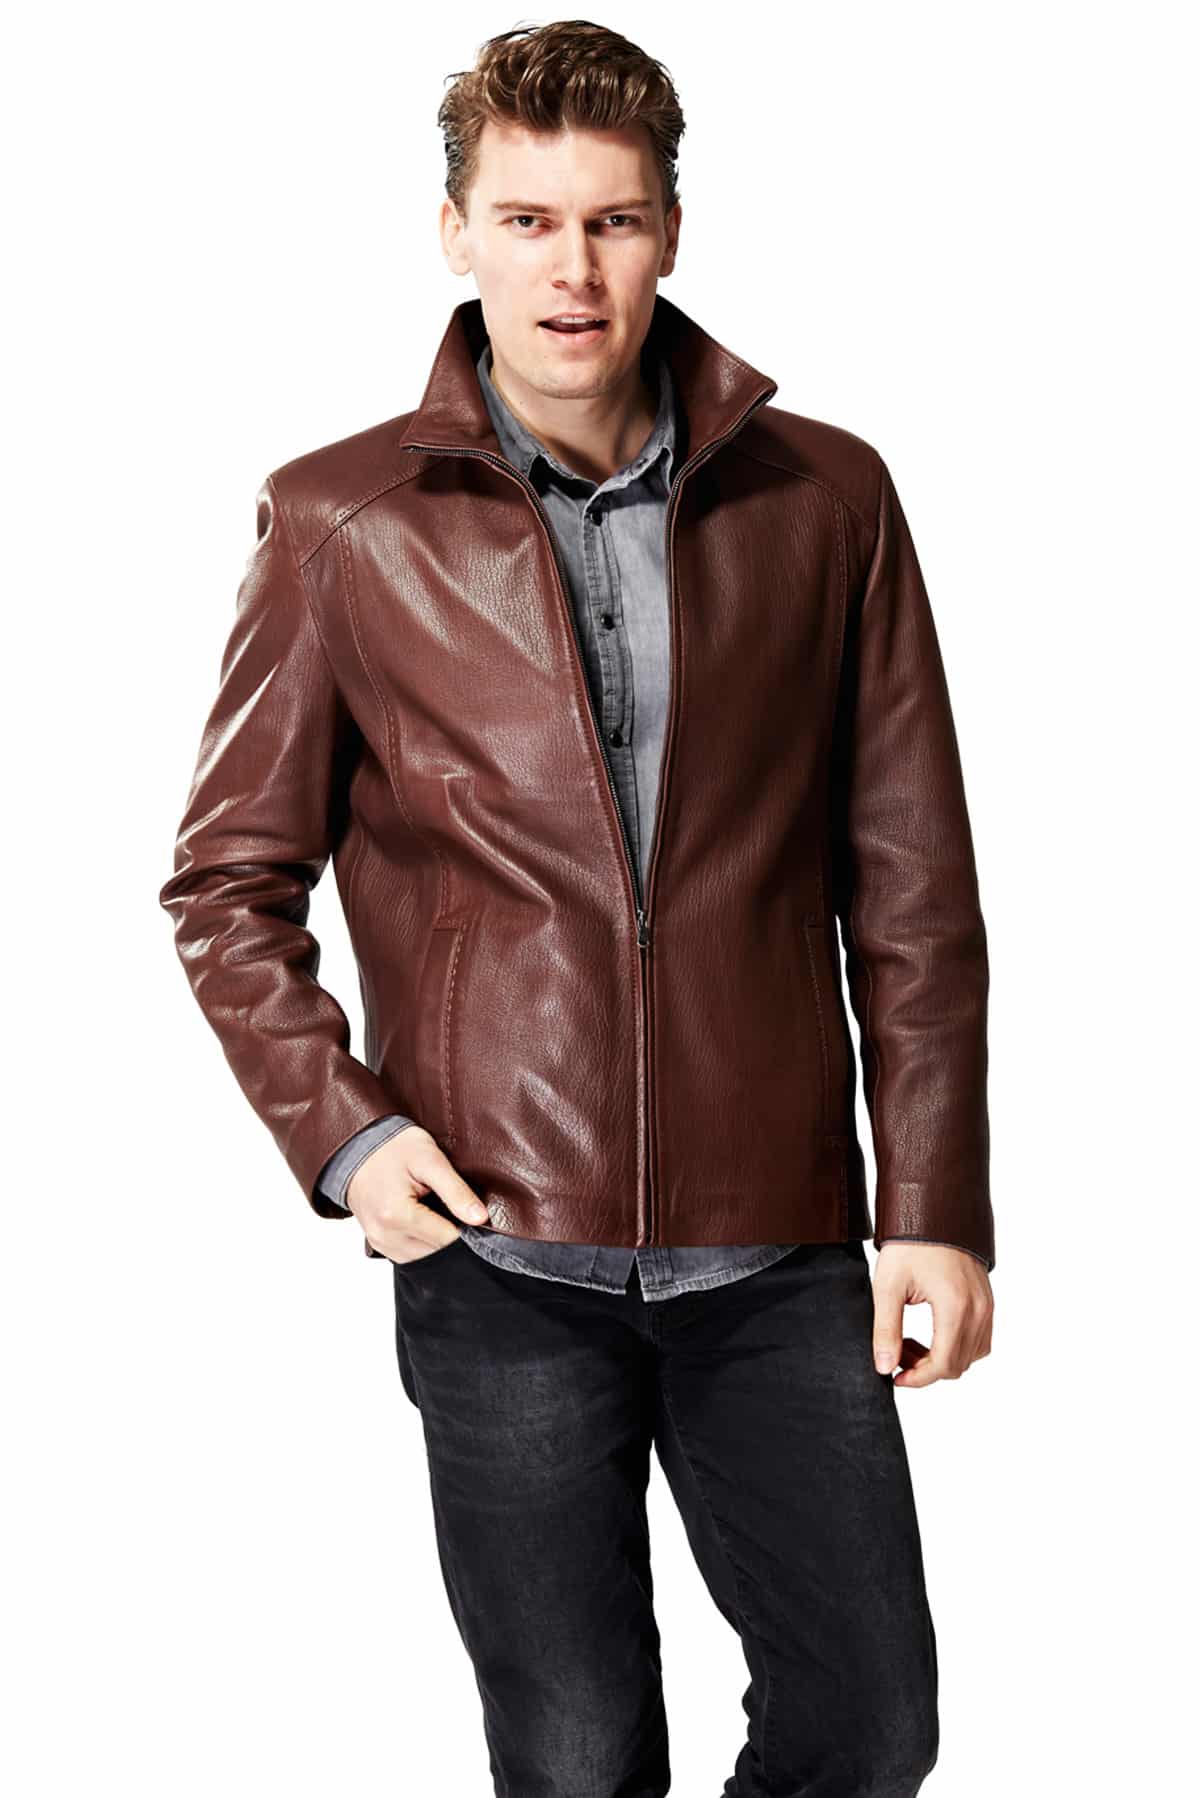 Juno Men's 100% Real Brown Leather New Zealand Classic Jacket